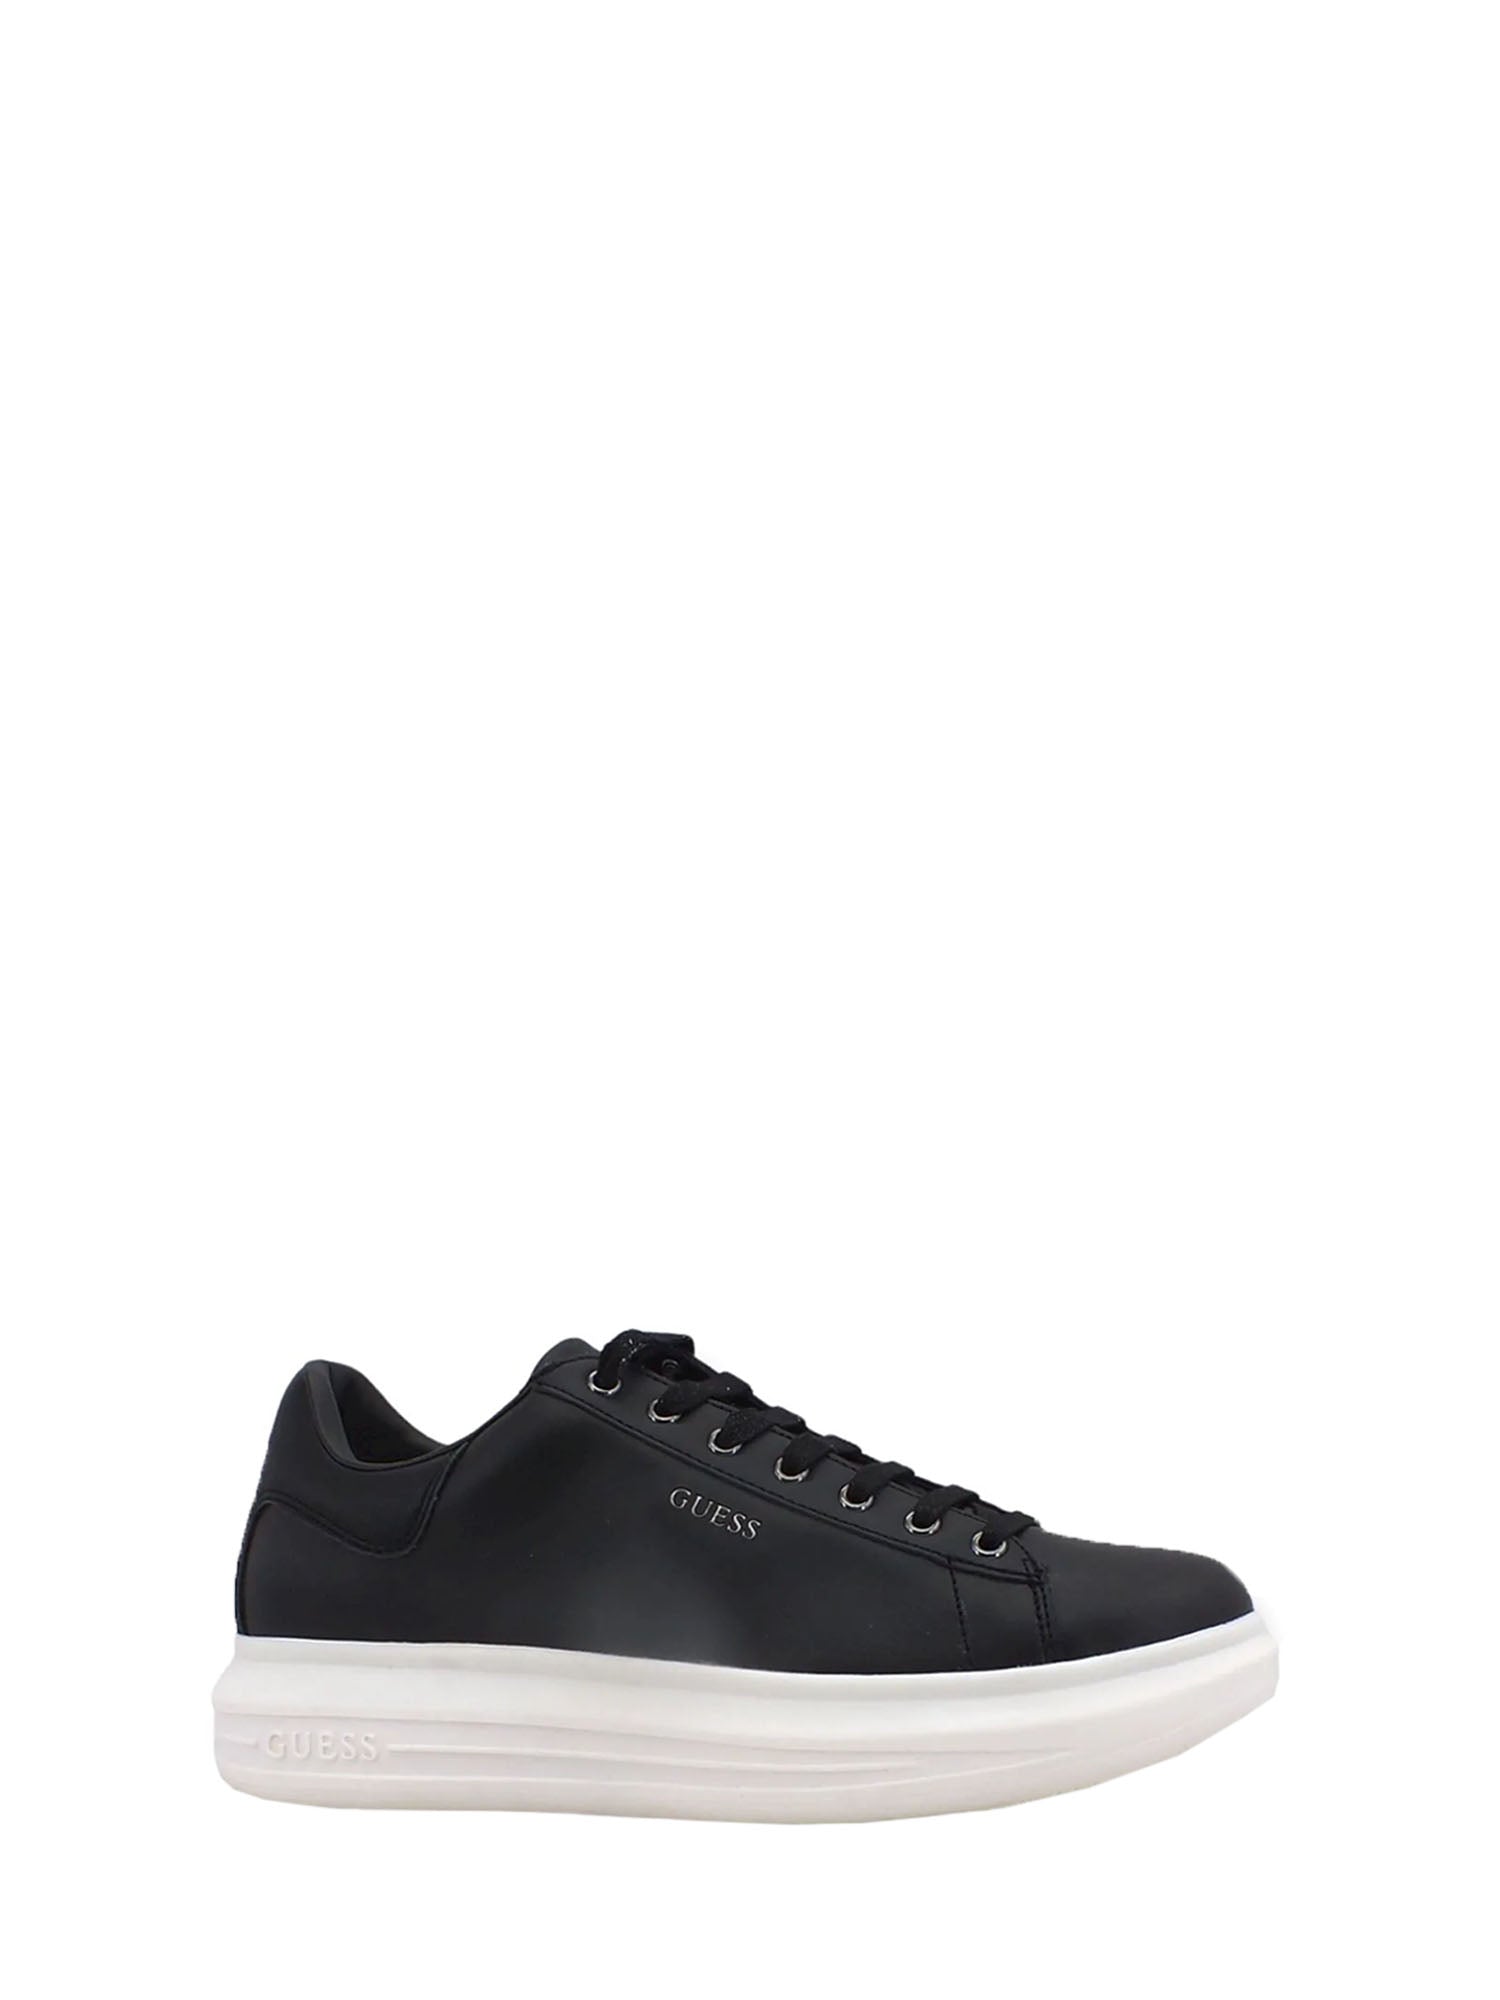 GUESS JEANS SNEAKERS SALERNO NERO - BIANCO